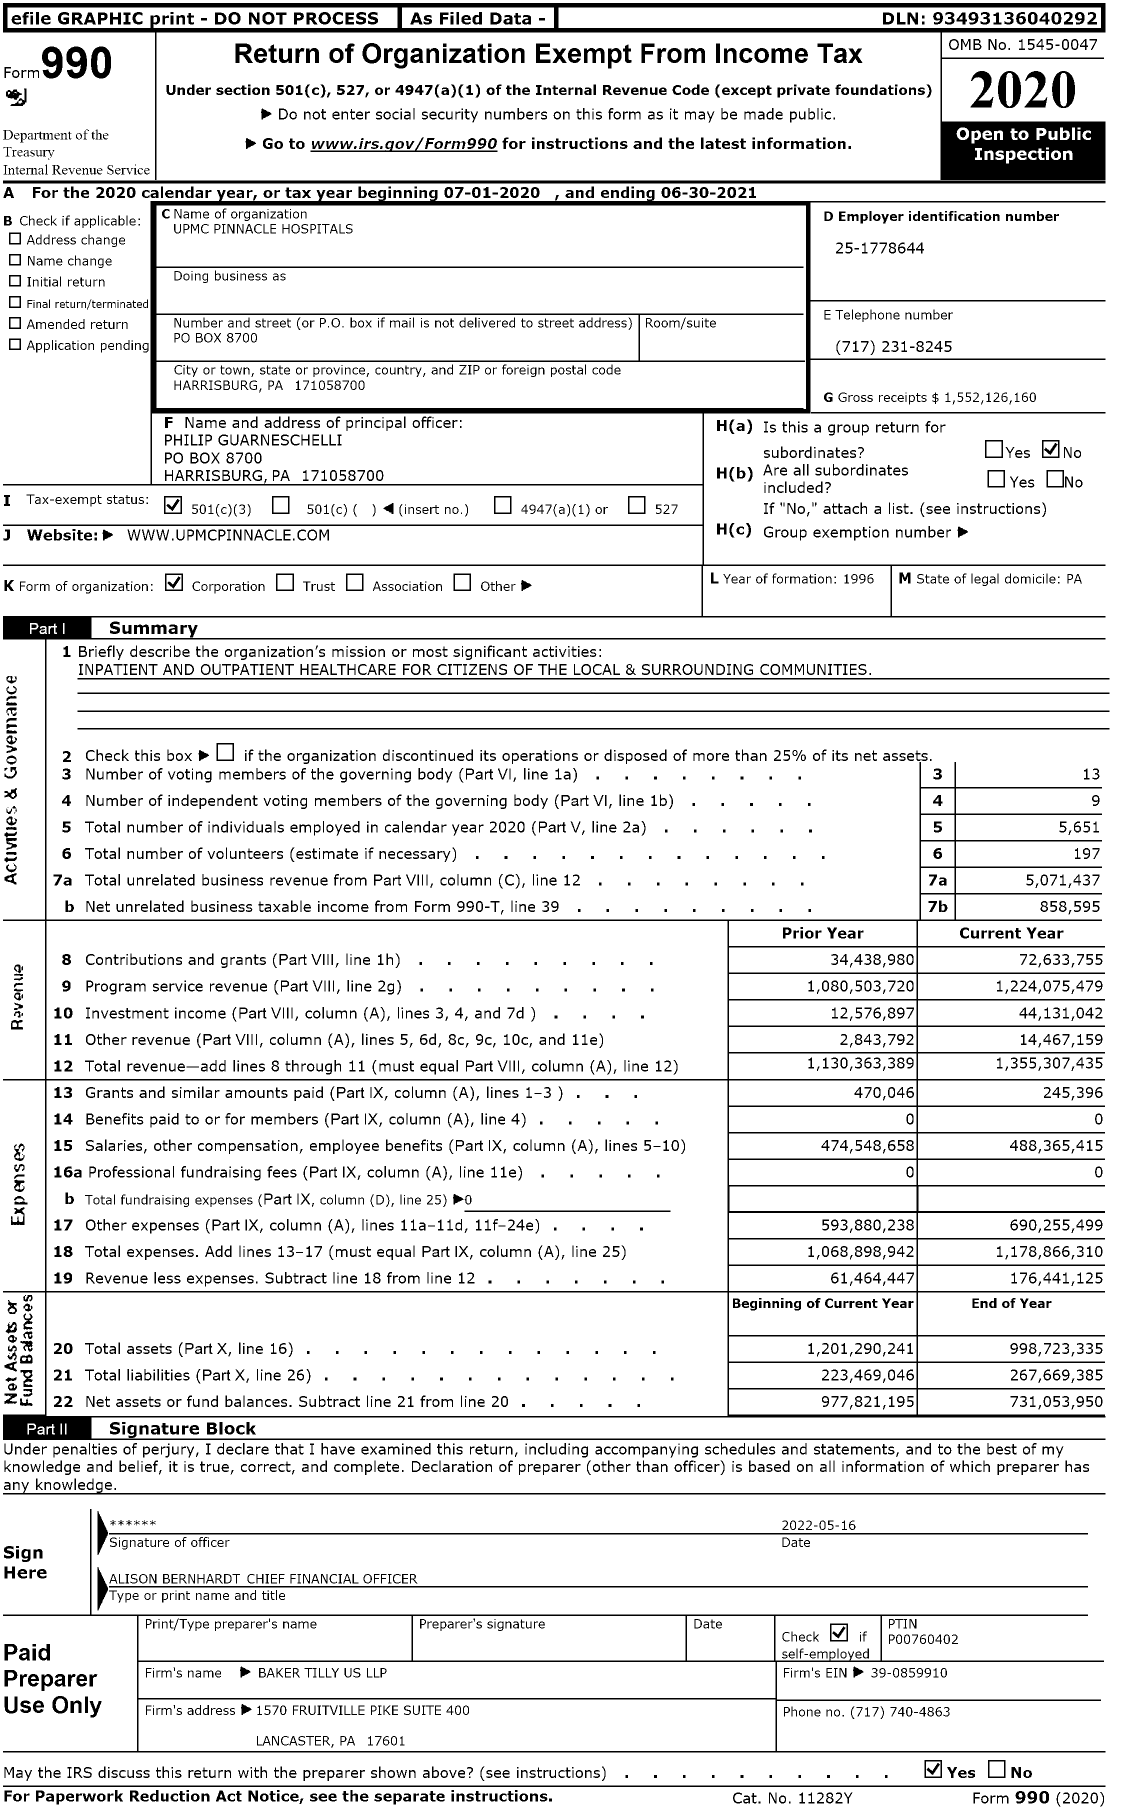 Image of first page of 2020 Form 990 for Upmc Pinnacle Hospitals